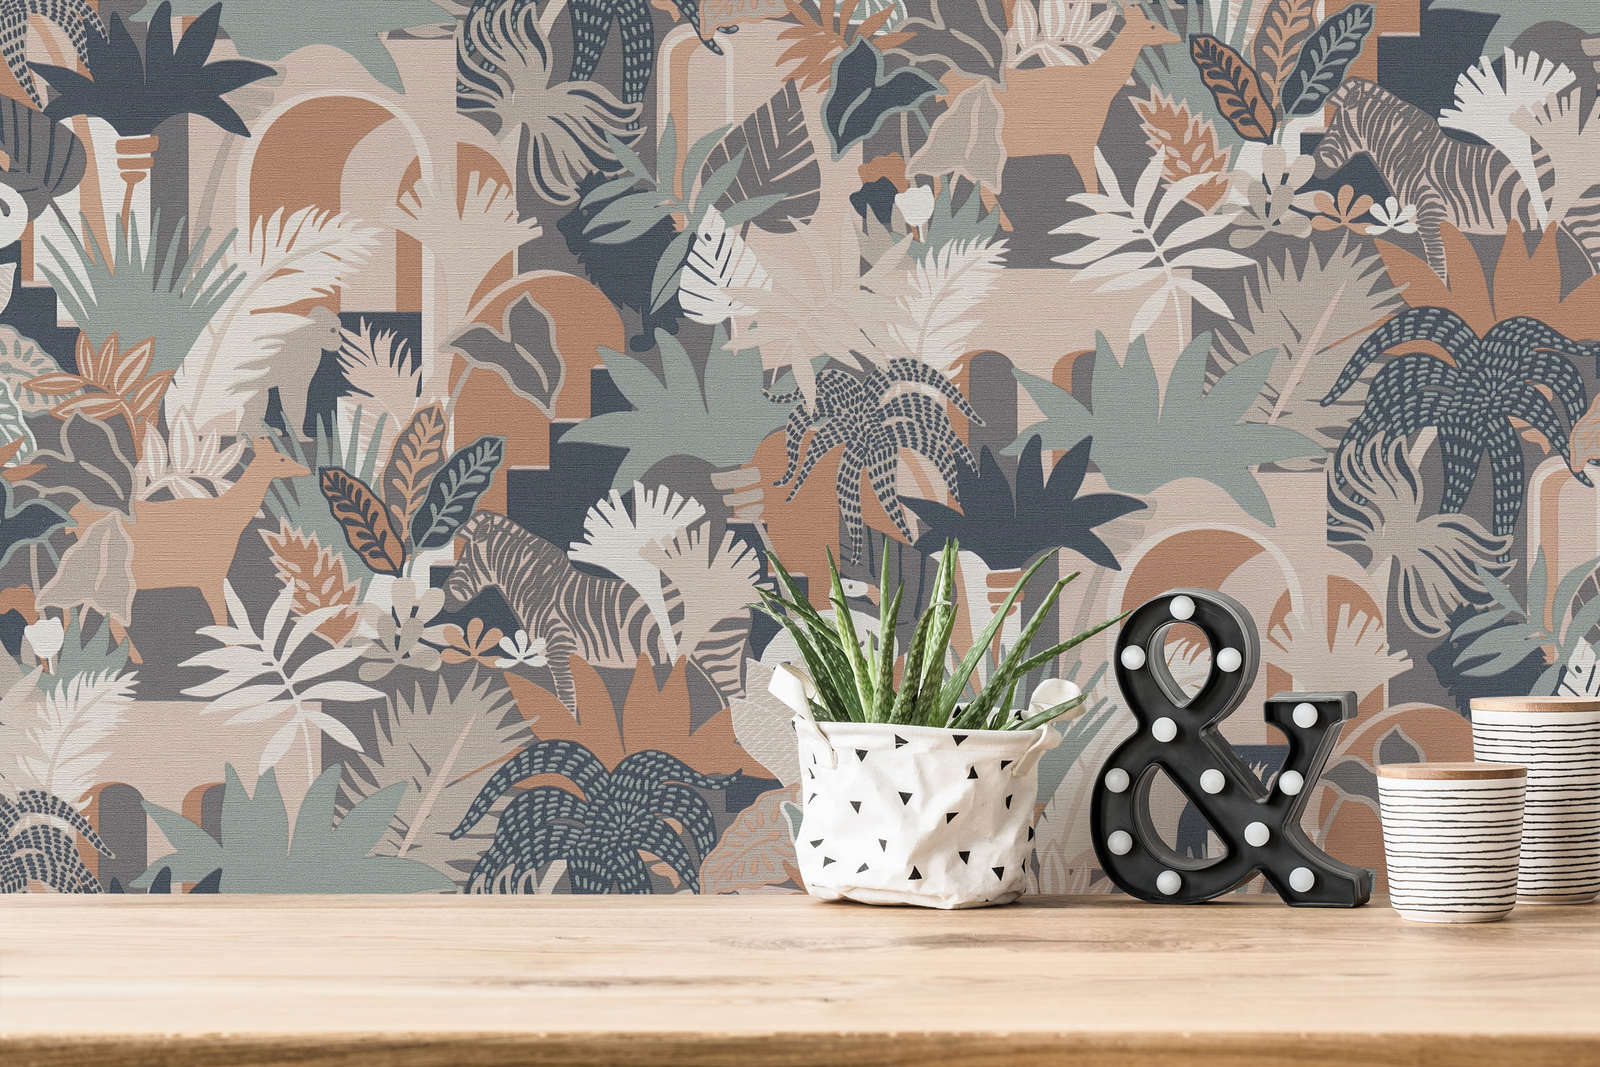             Non-woven wallpaper in subtle colours with animals - multicoloured, brown, pink
        